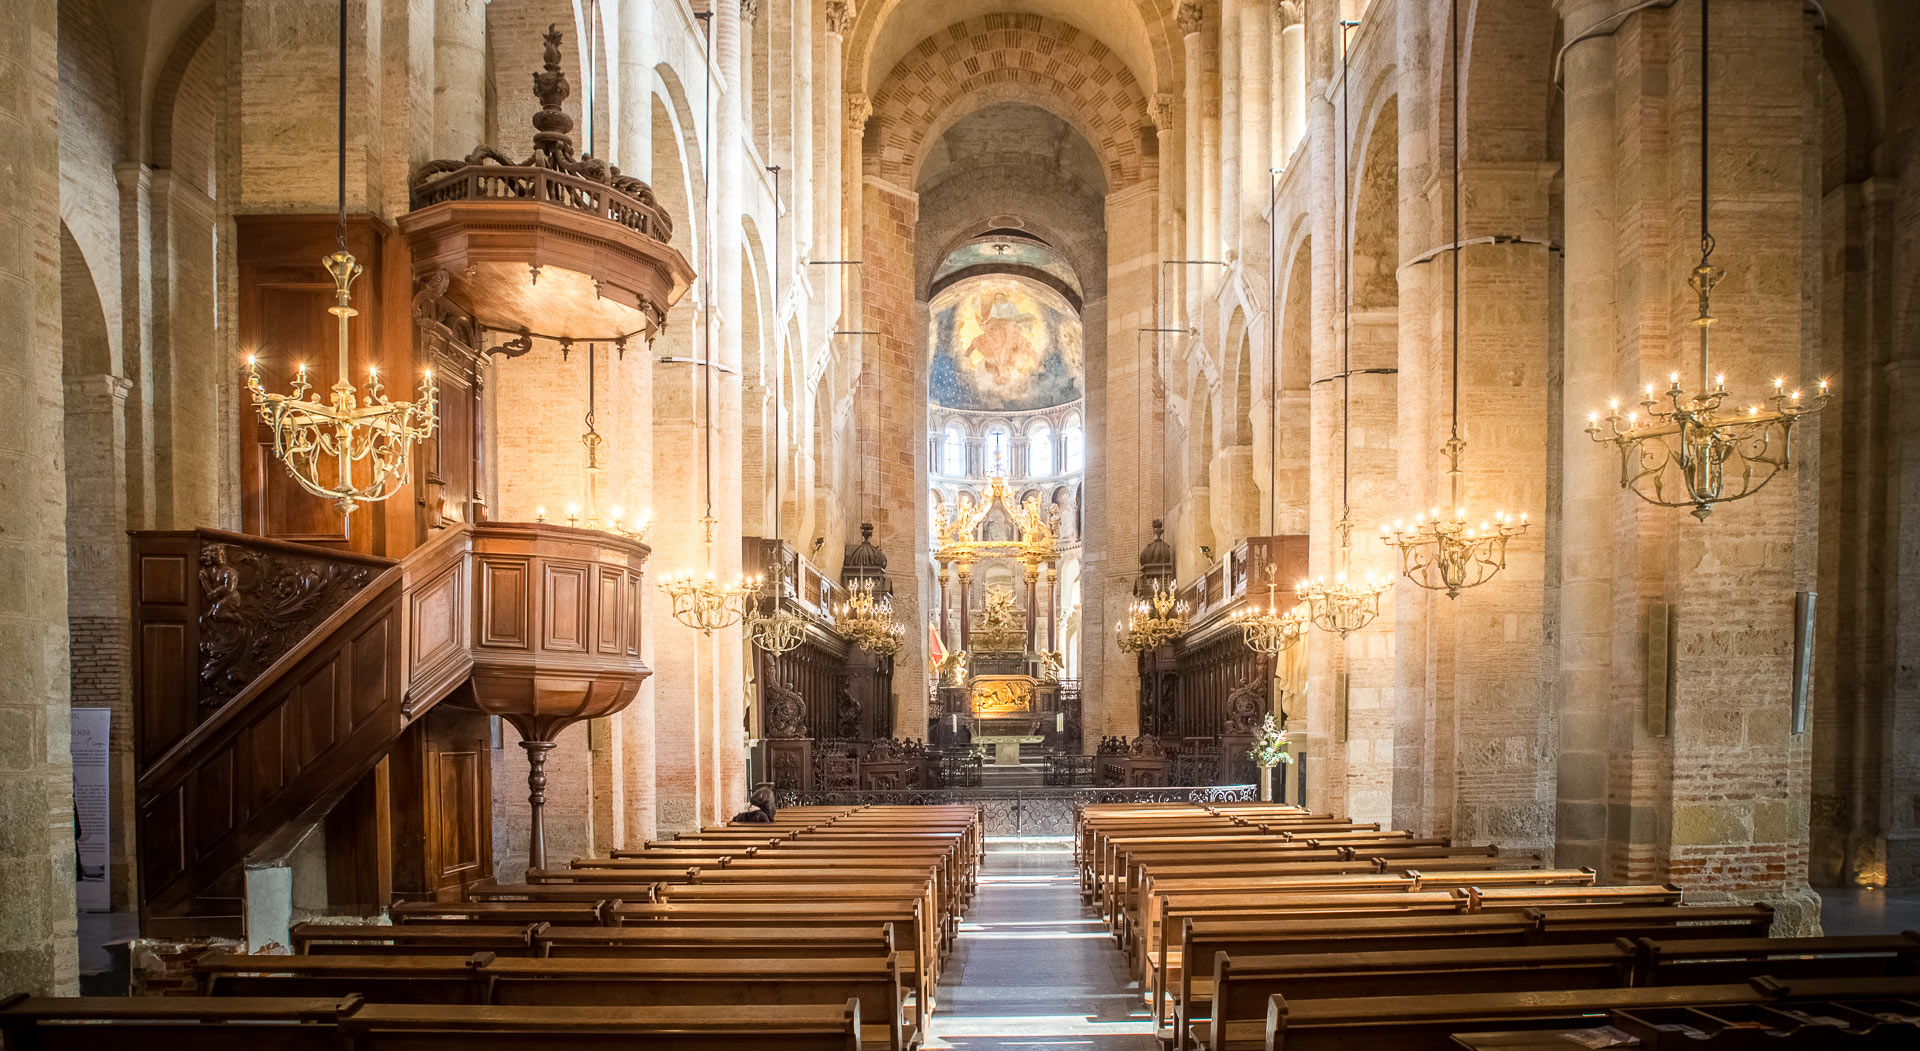 The interior of Saint-Sernin Basilica - 3 days in Toulouse itinerary